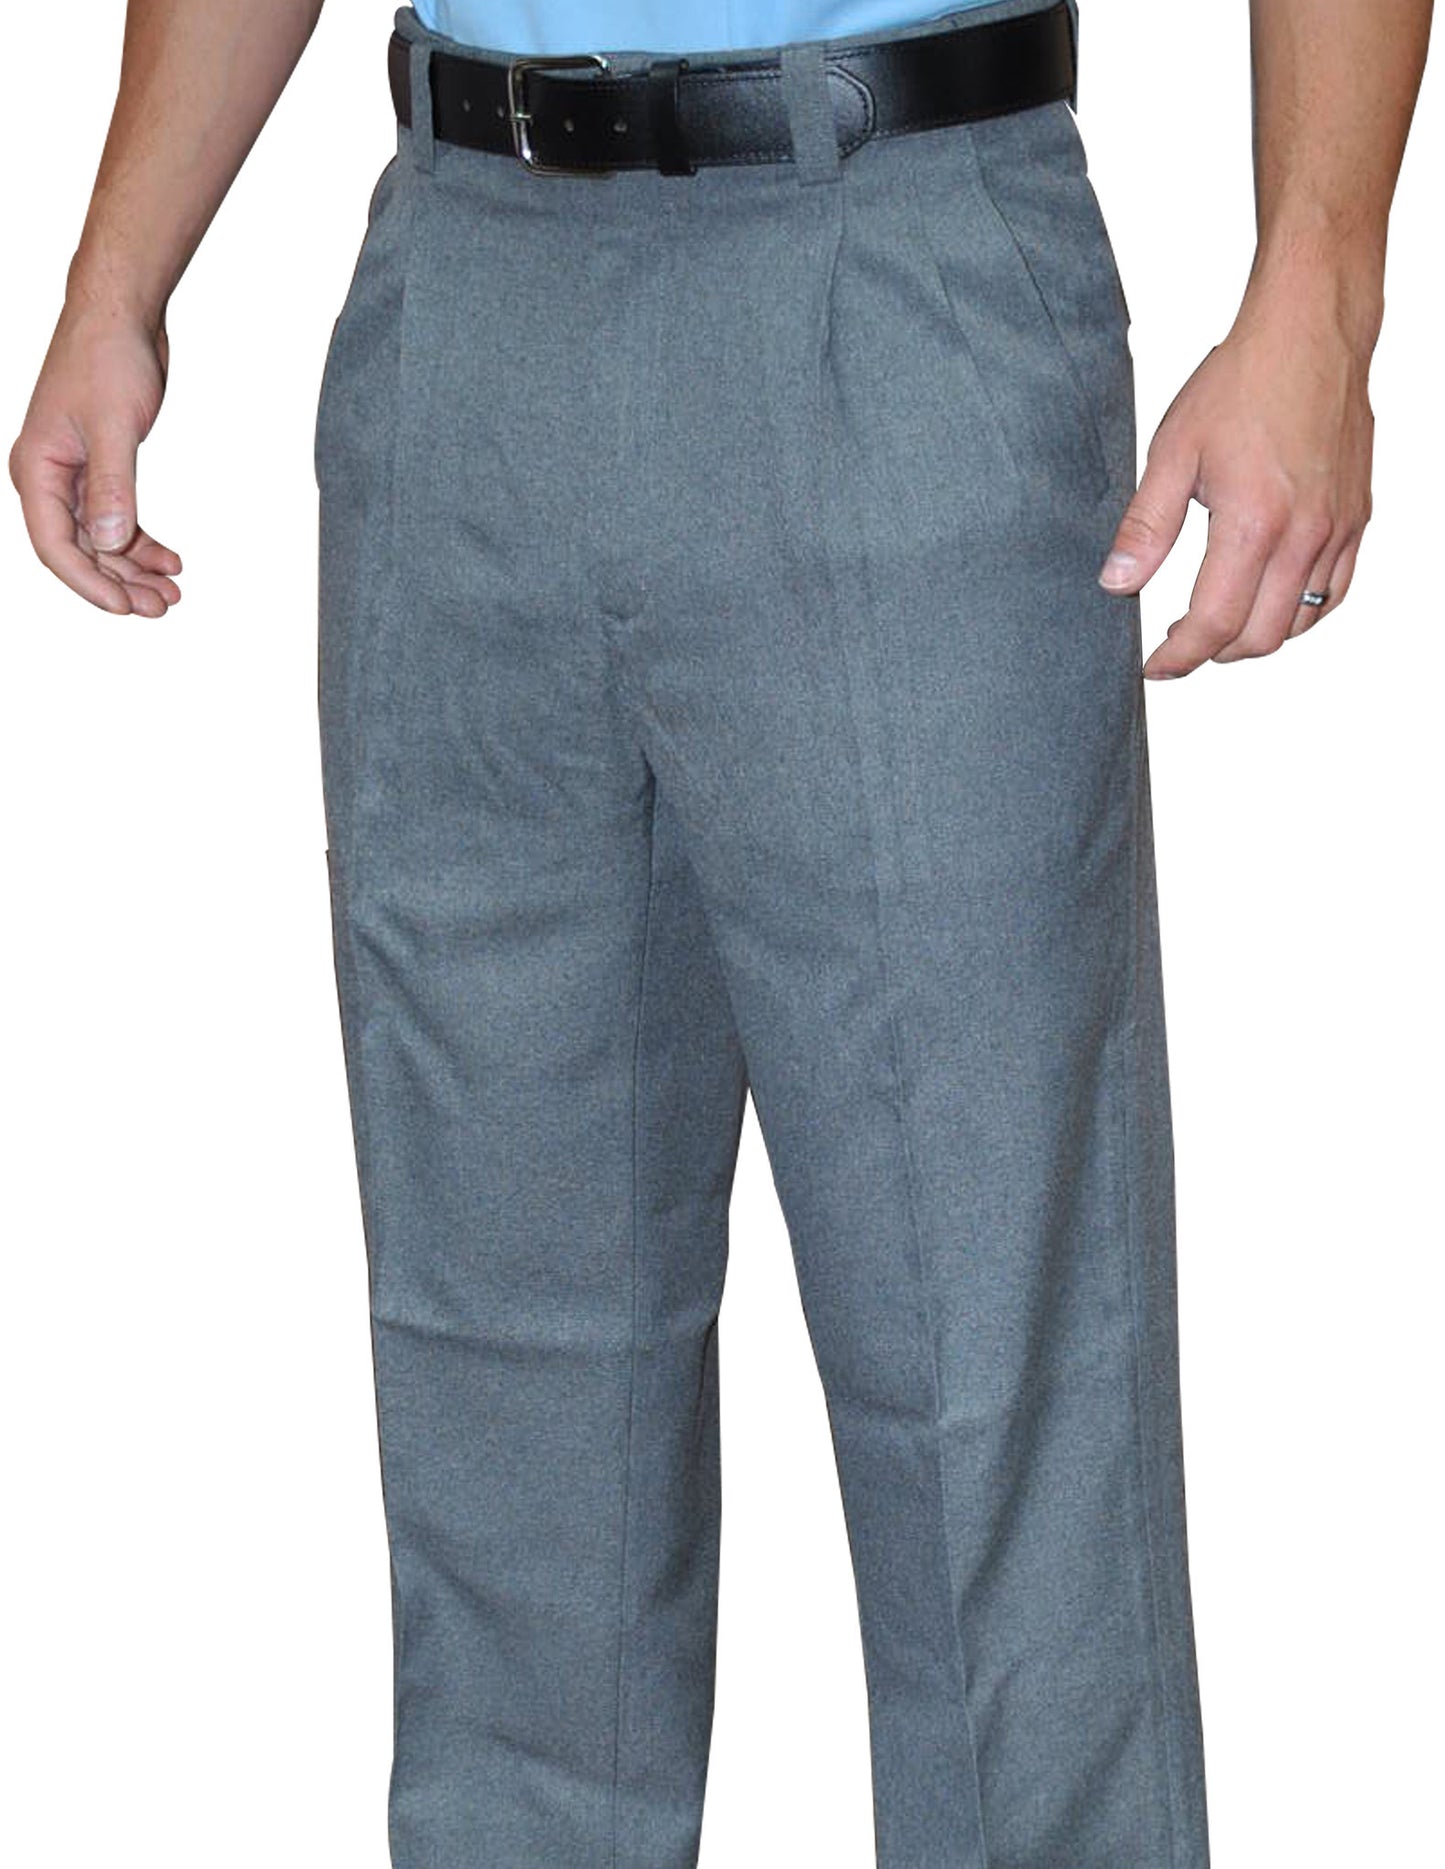 BBS372-Smitty Pleated Plate Pants-Heather Grey Only